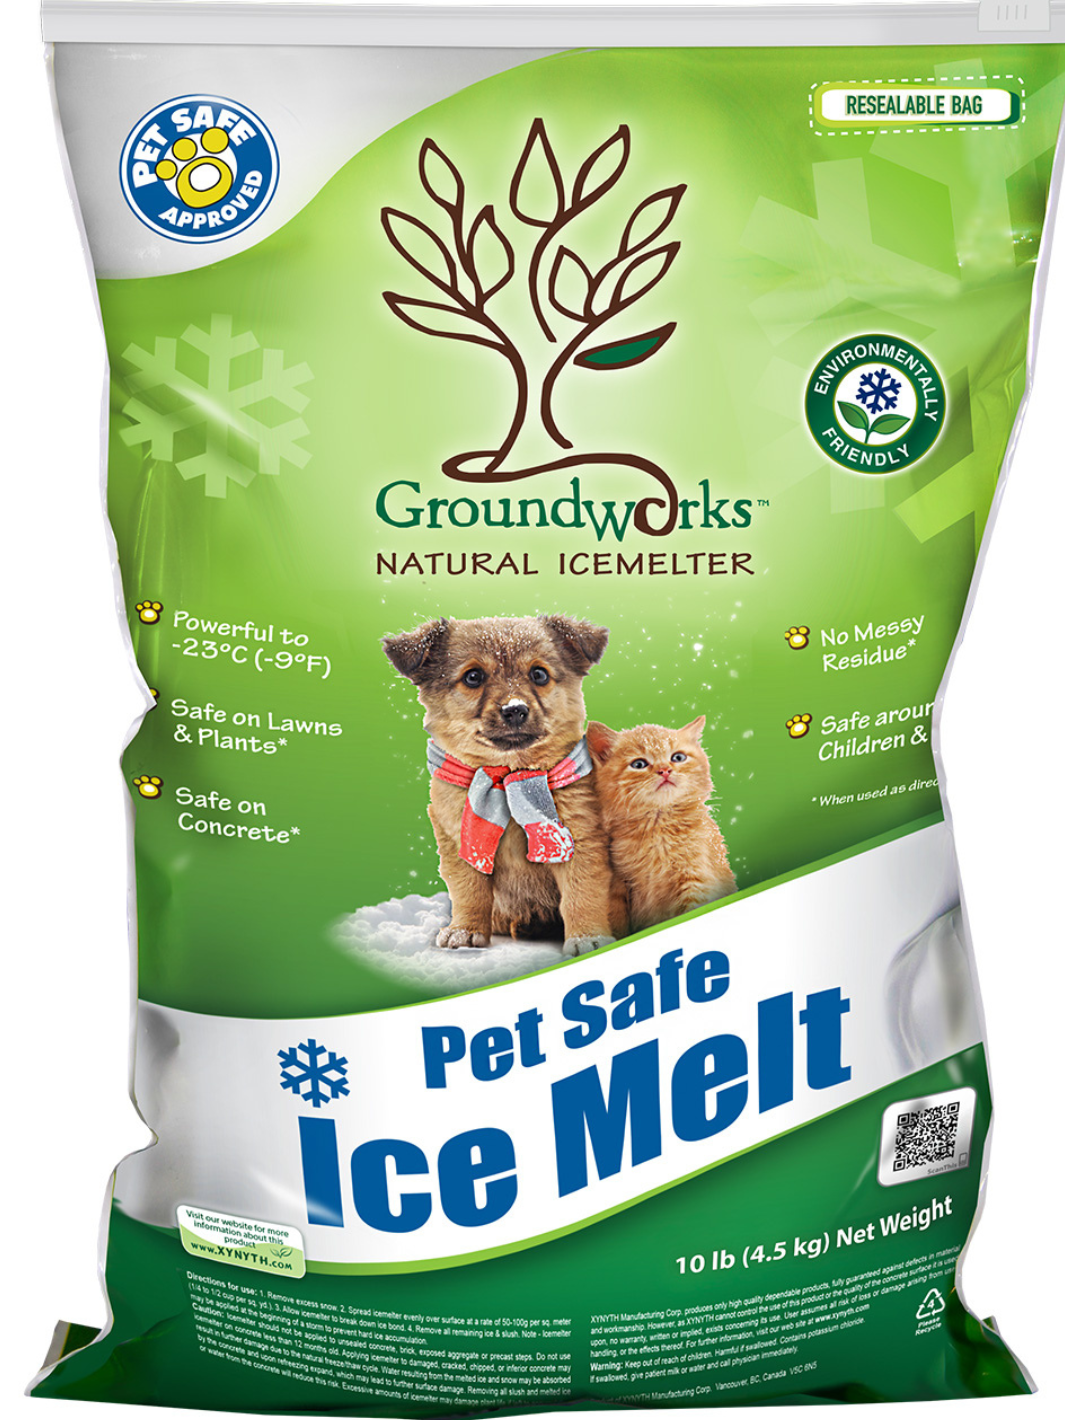 Ice Melt Salt Products - Circle B Inc Has All Your Winter Needs Covered!